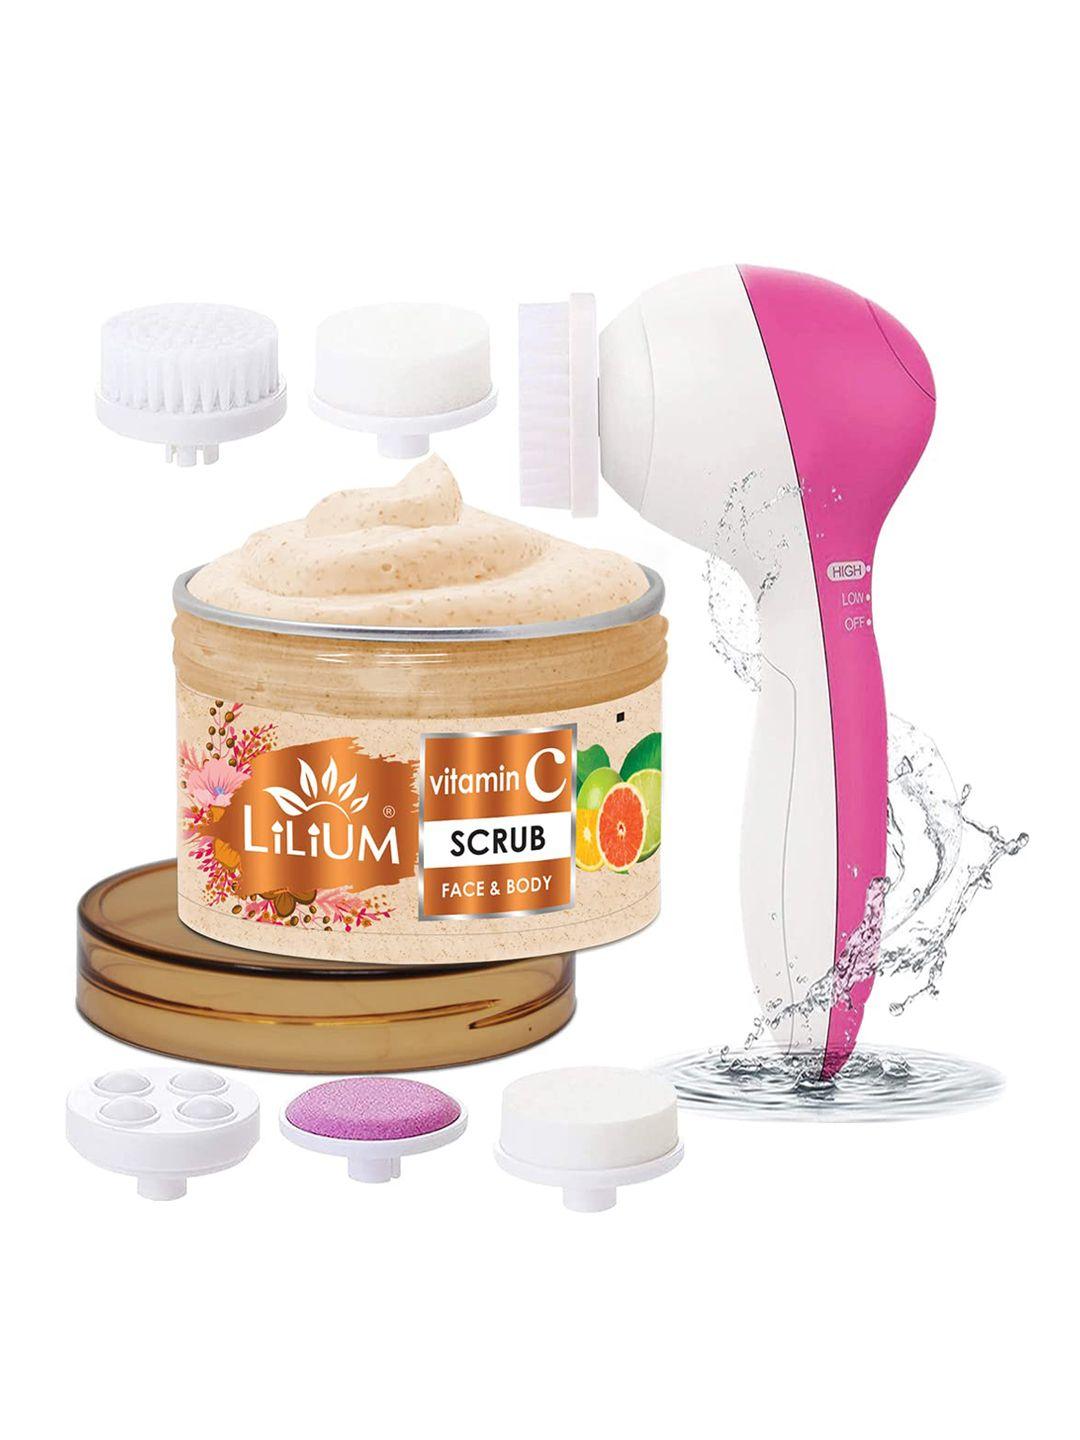 lilium vitamin c face & body scrub with multifunction 5in1 massager